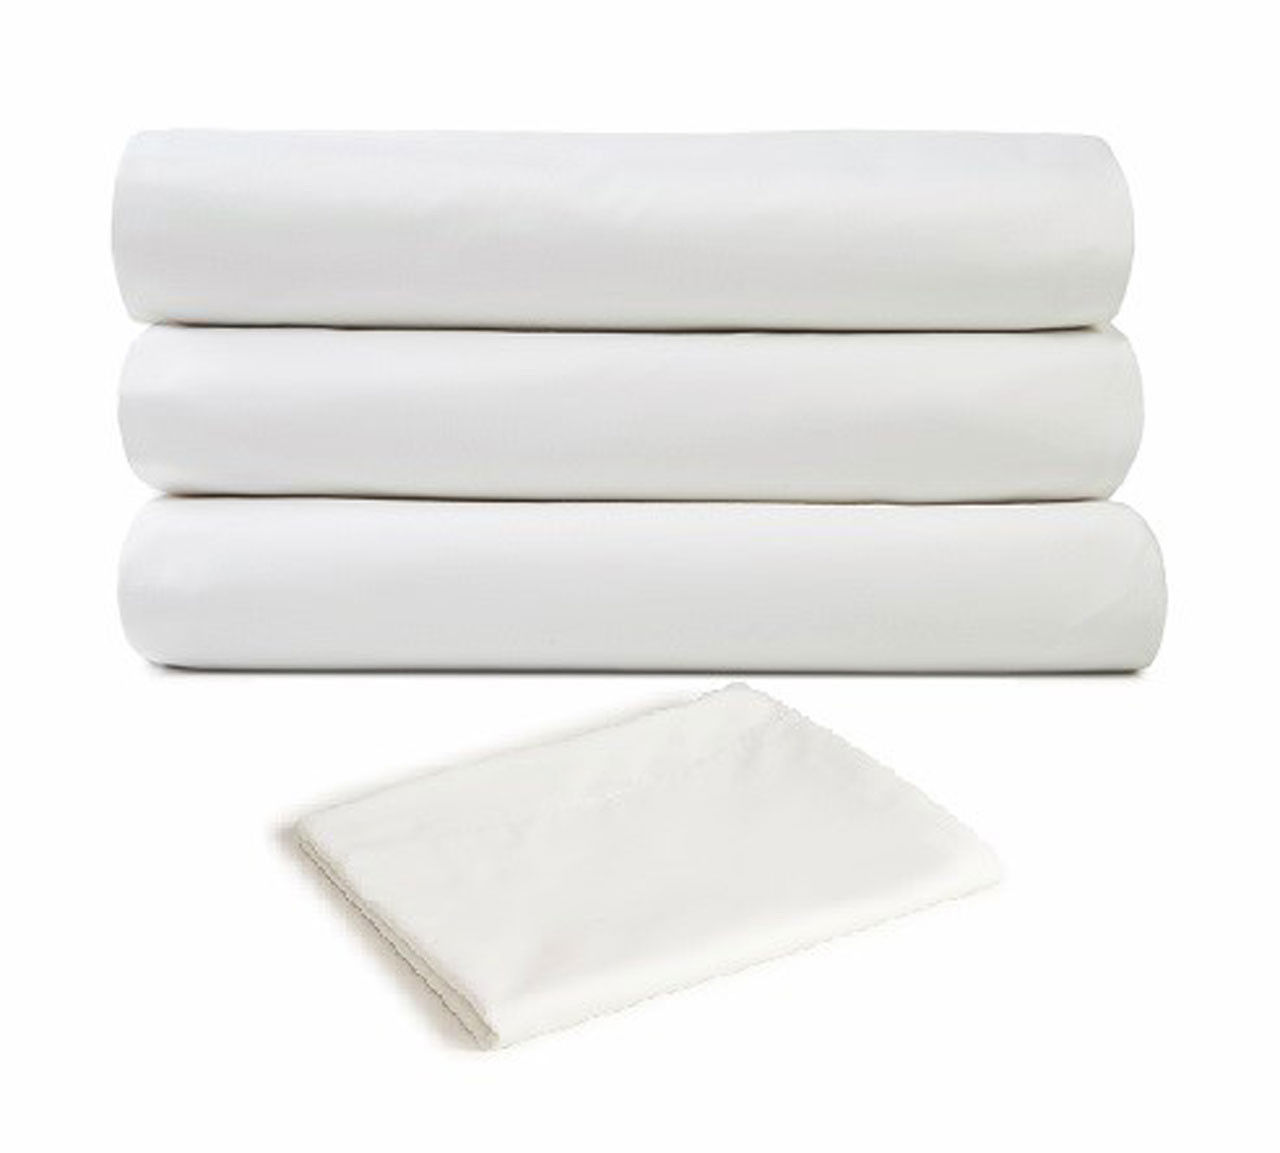 What are the specifications of the T310 Premium Bed Sheets?